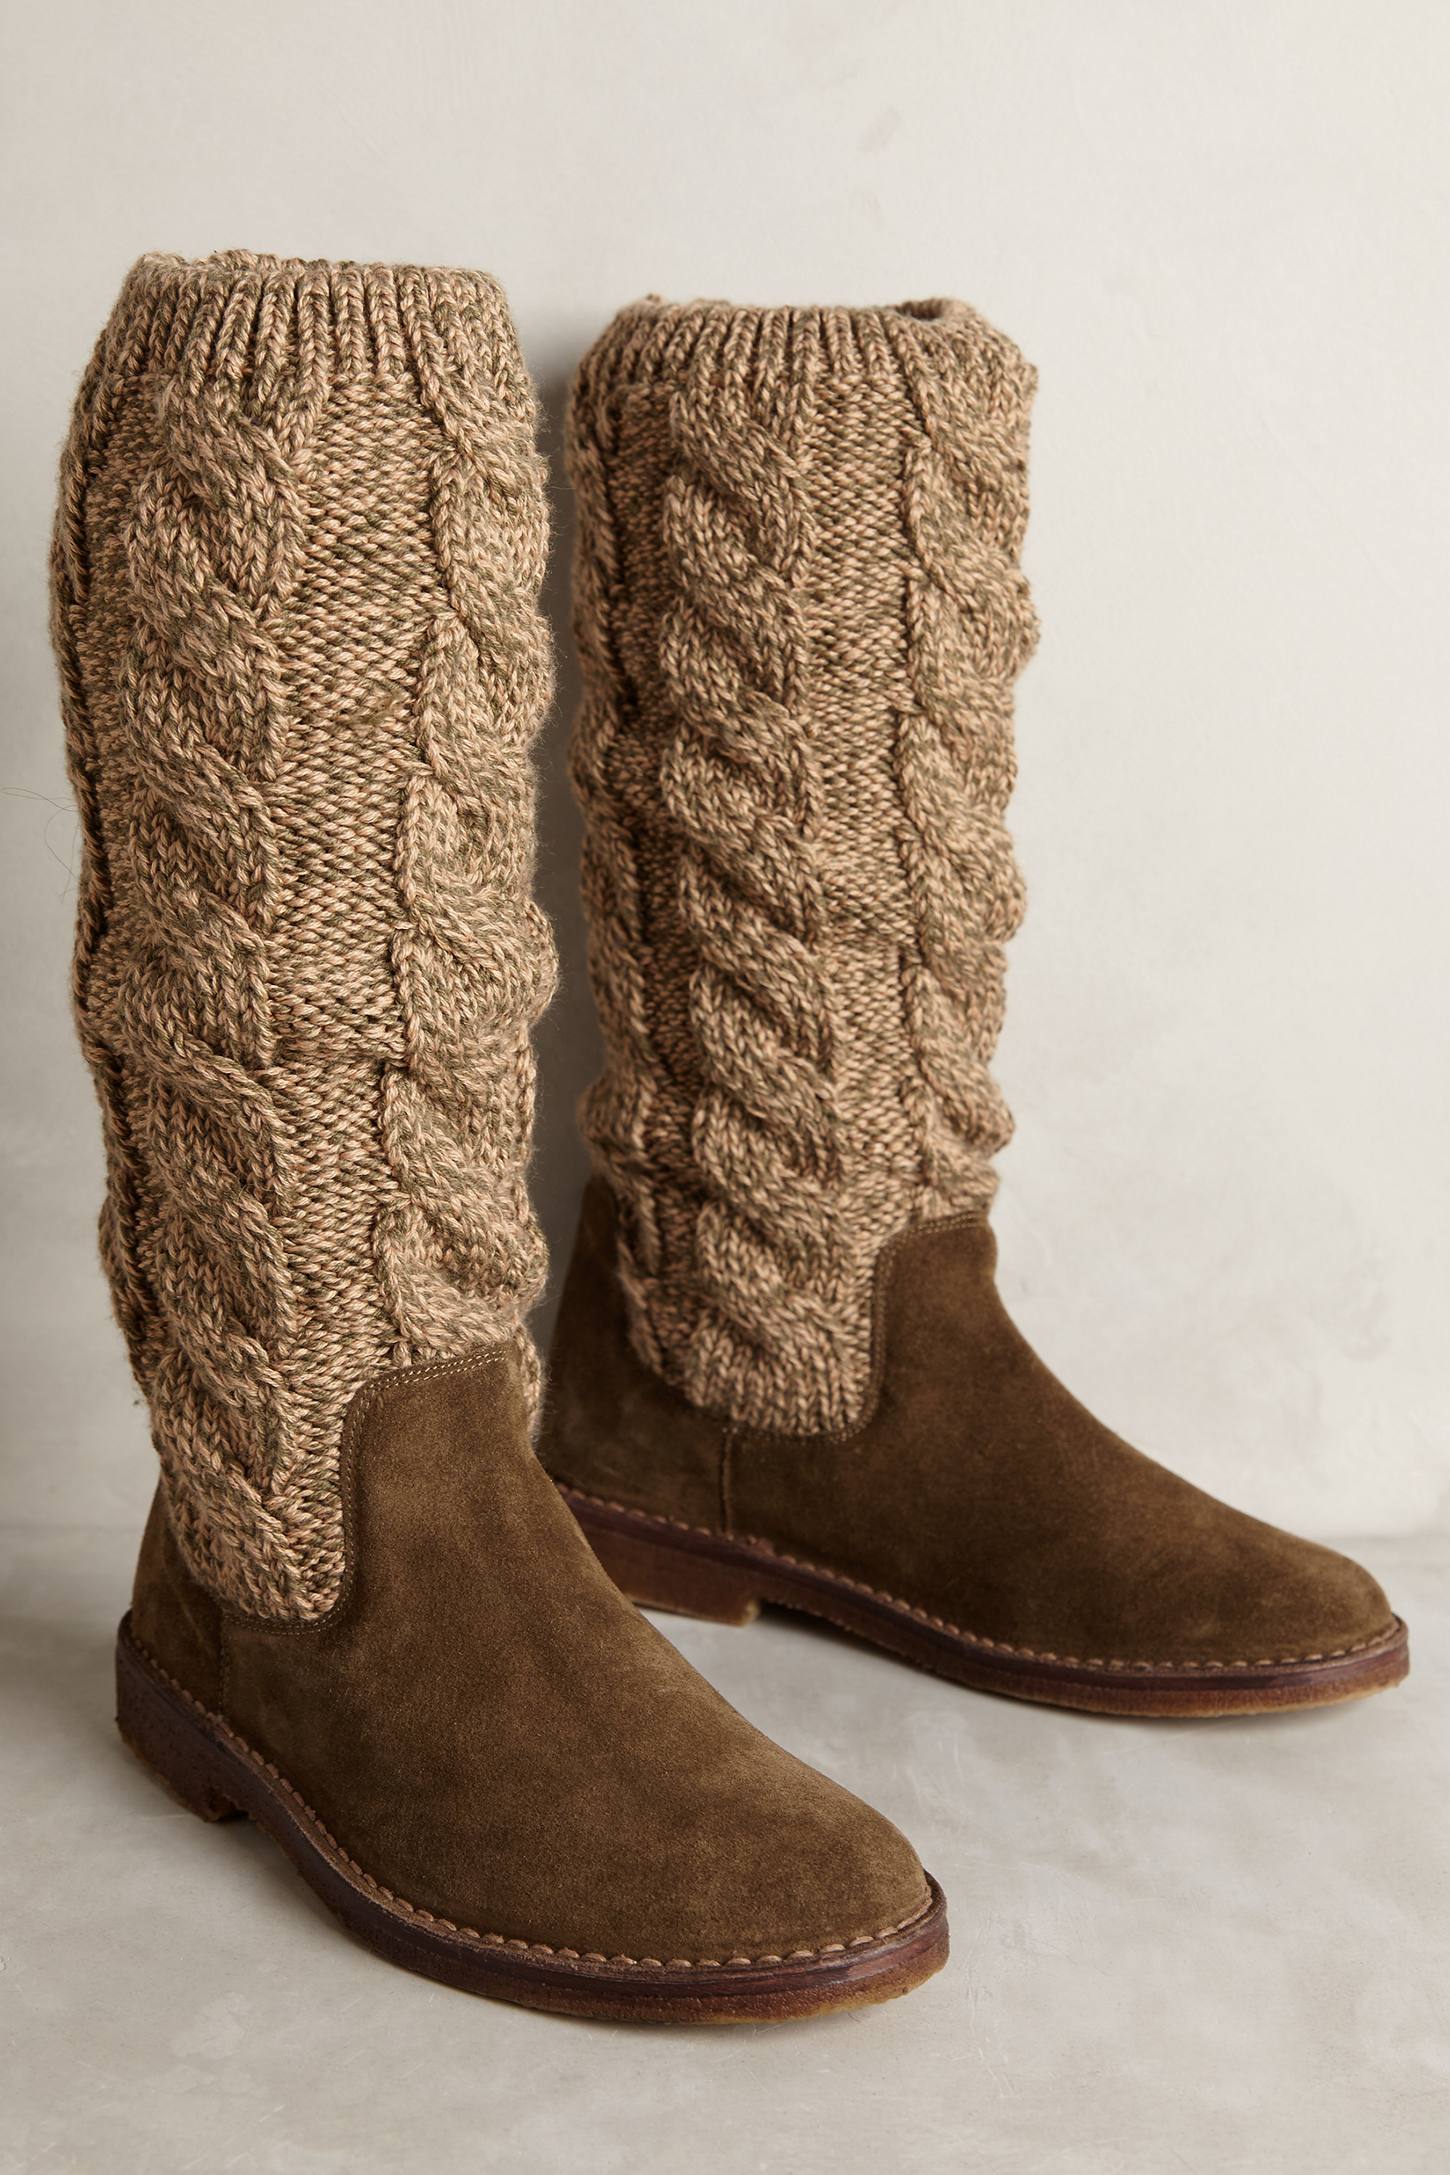 Miss Albright Cableknit Boots